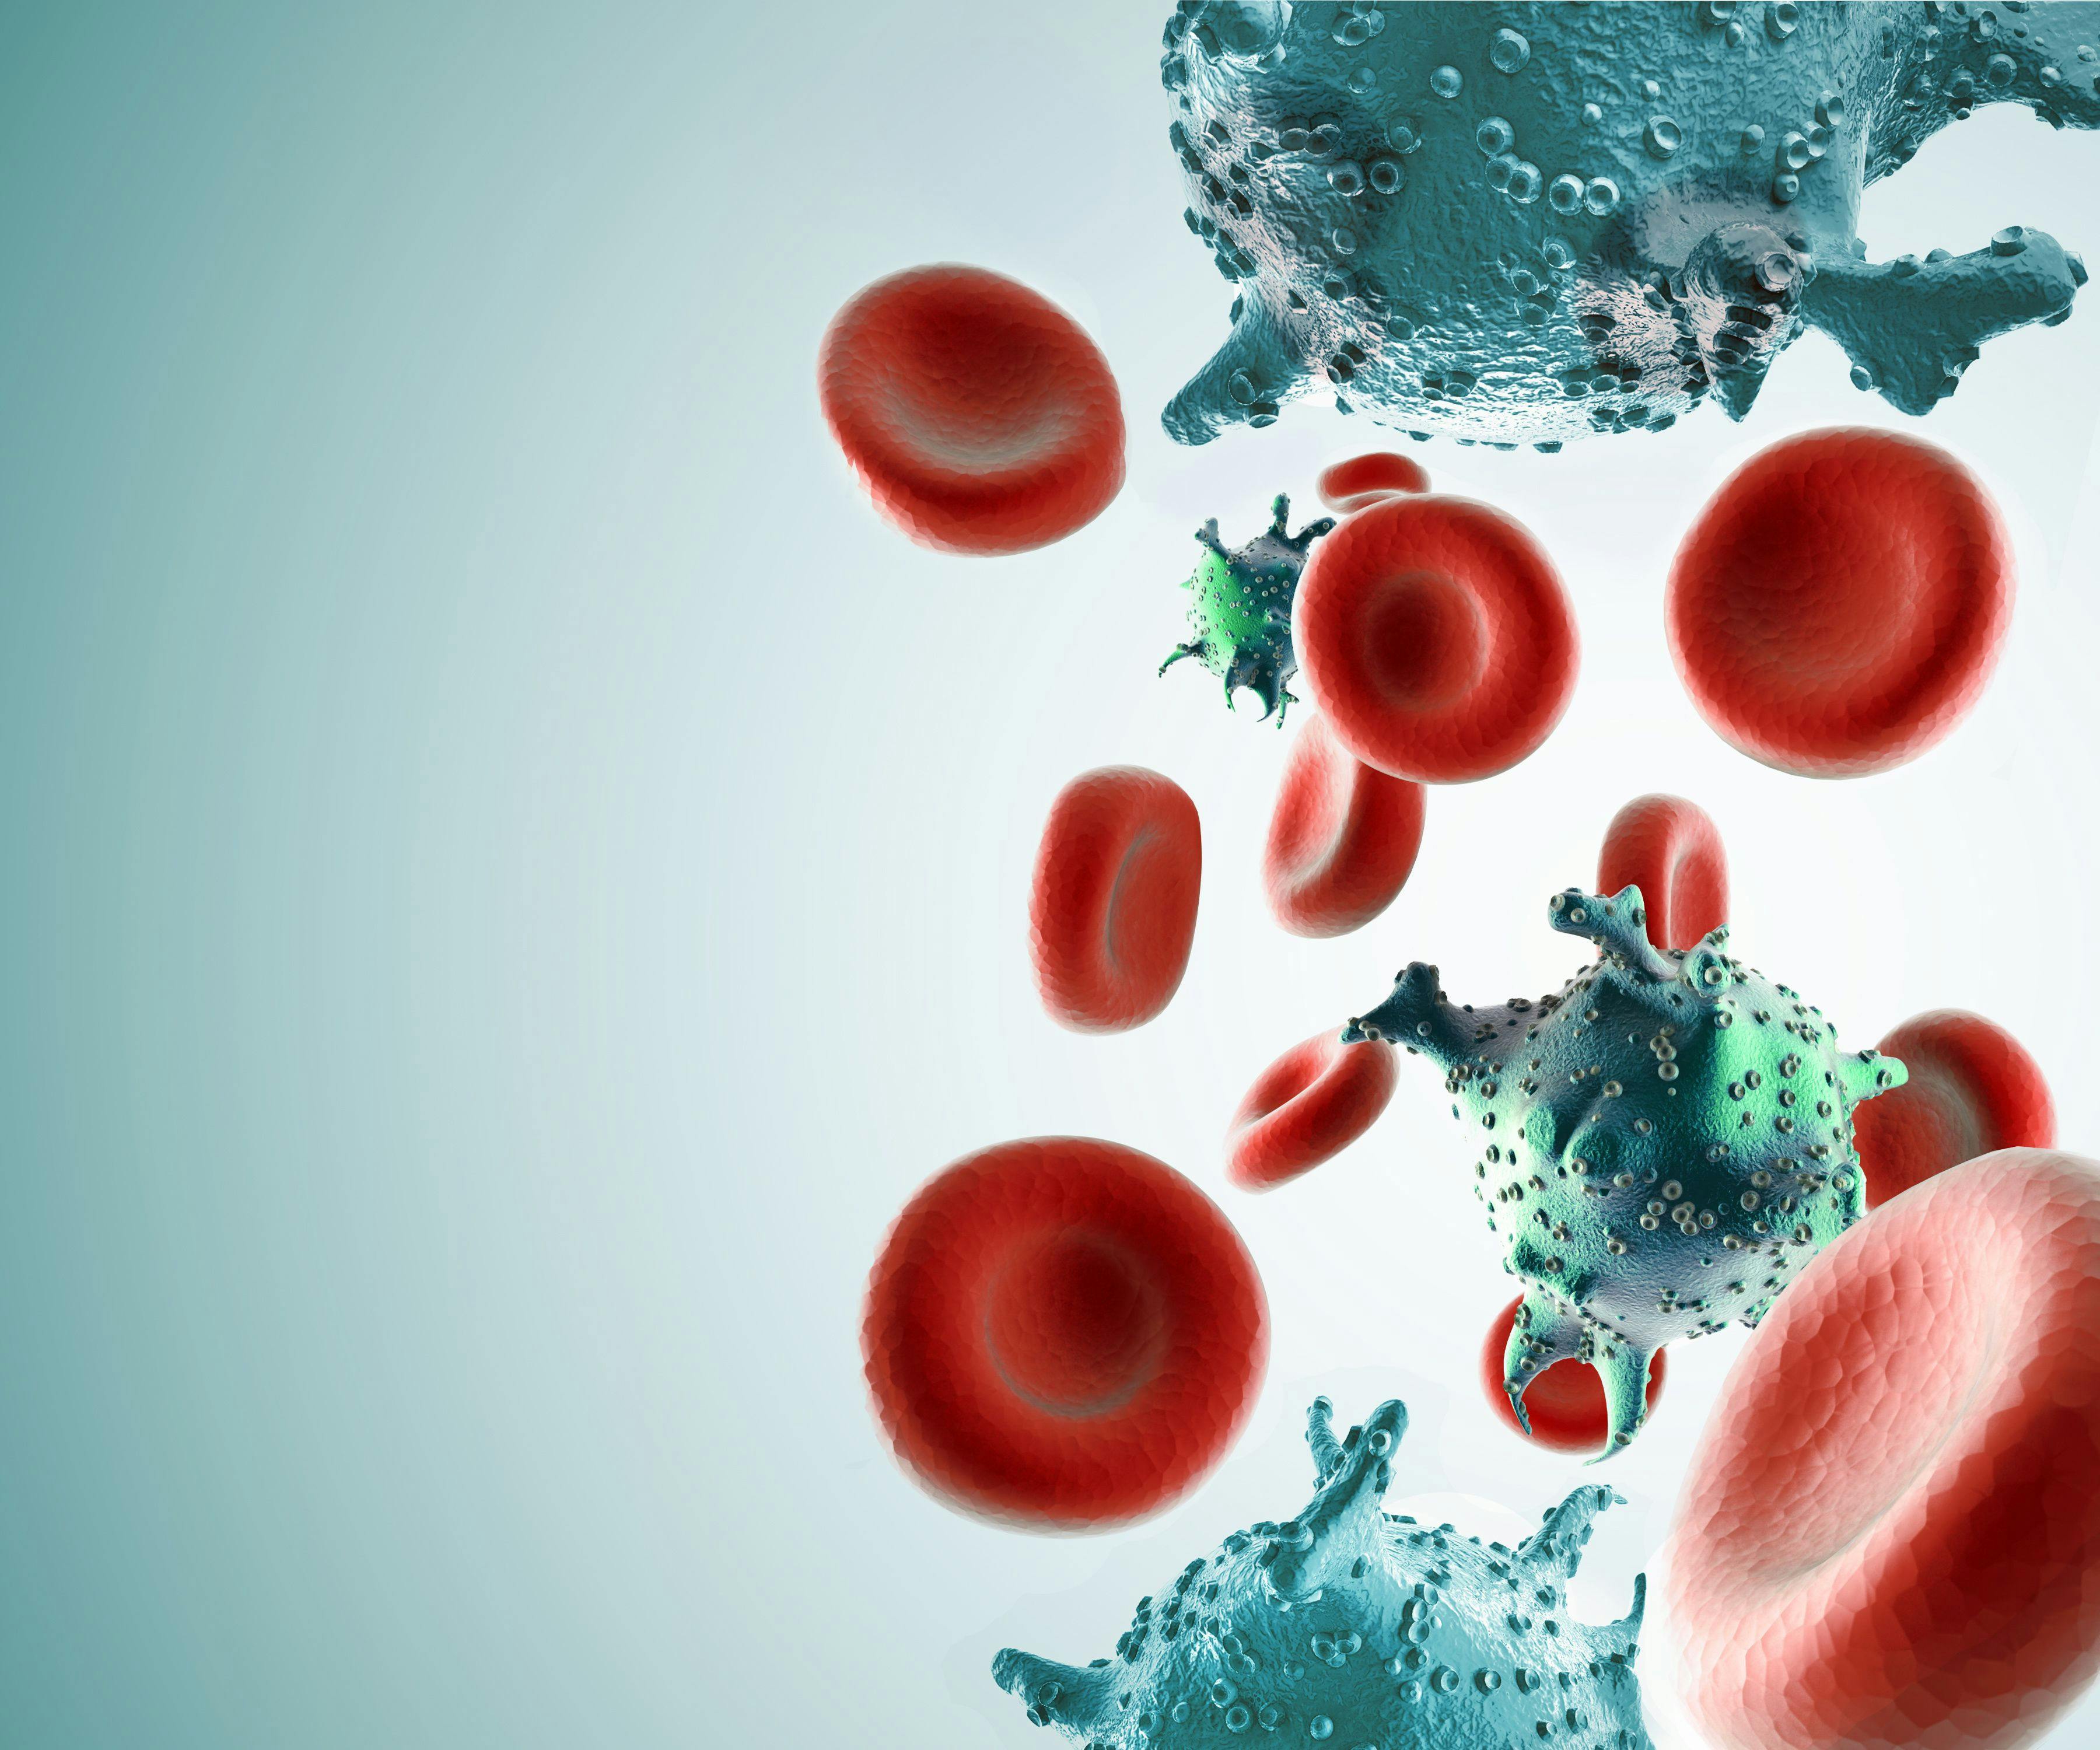 Results from the phase 1/2 NP30179 trial led the European Commission to grant conditional marketing authorization to patients with relapsed/refractory diffuse large B-cell lymphoma.

